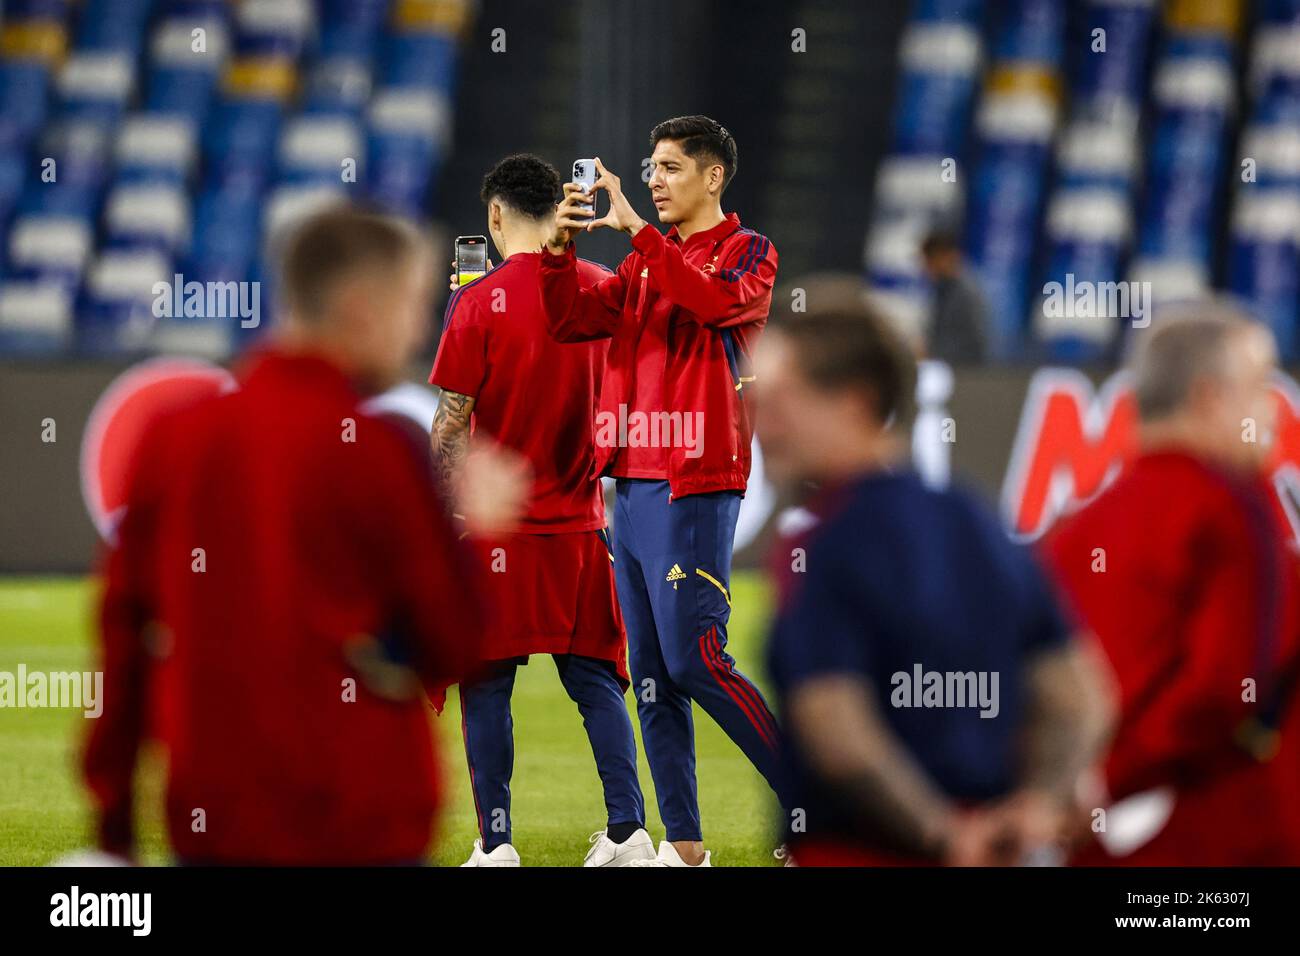 NAPLES - Edson Alvarez of Ajax during the Walkaround the pitch ahead of the Champions League game against SSC Napoli at Stadium Diego Armando Maradona on October 11, 2022 in Naples, Italy. ANP MAURICE VAN STEEN Stock Photo